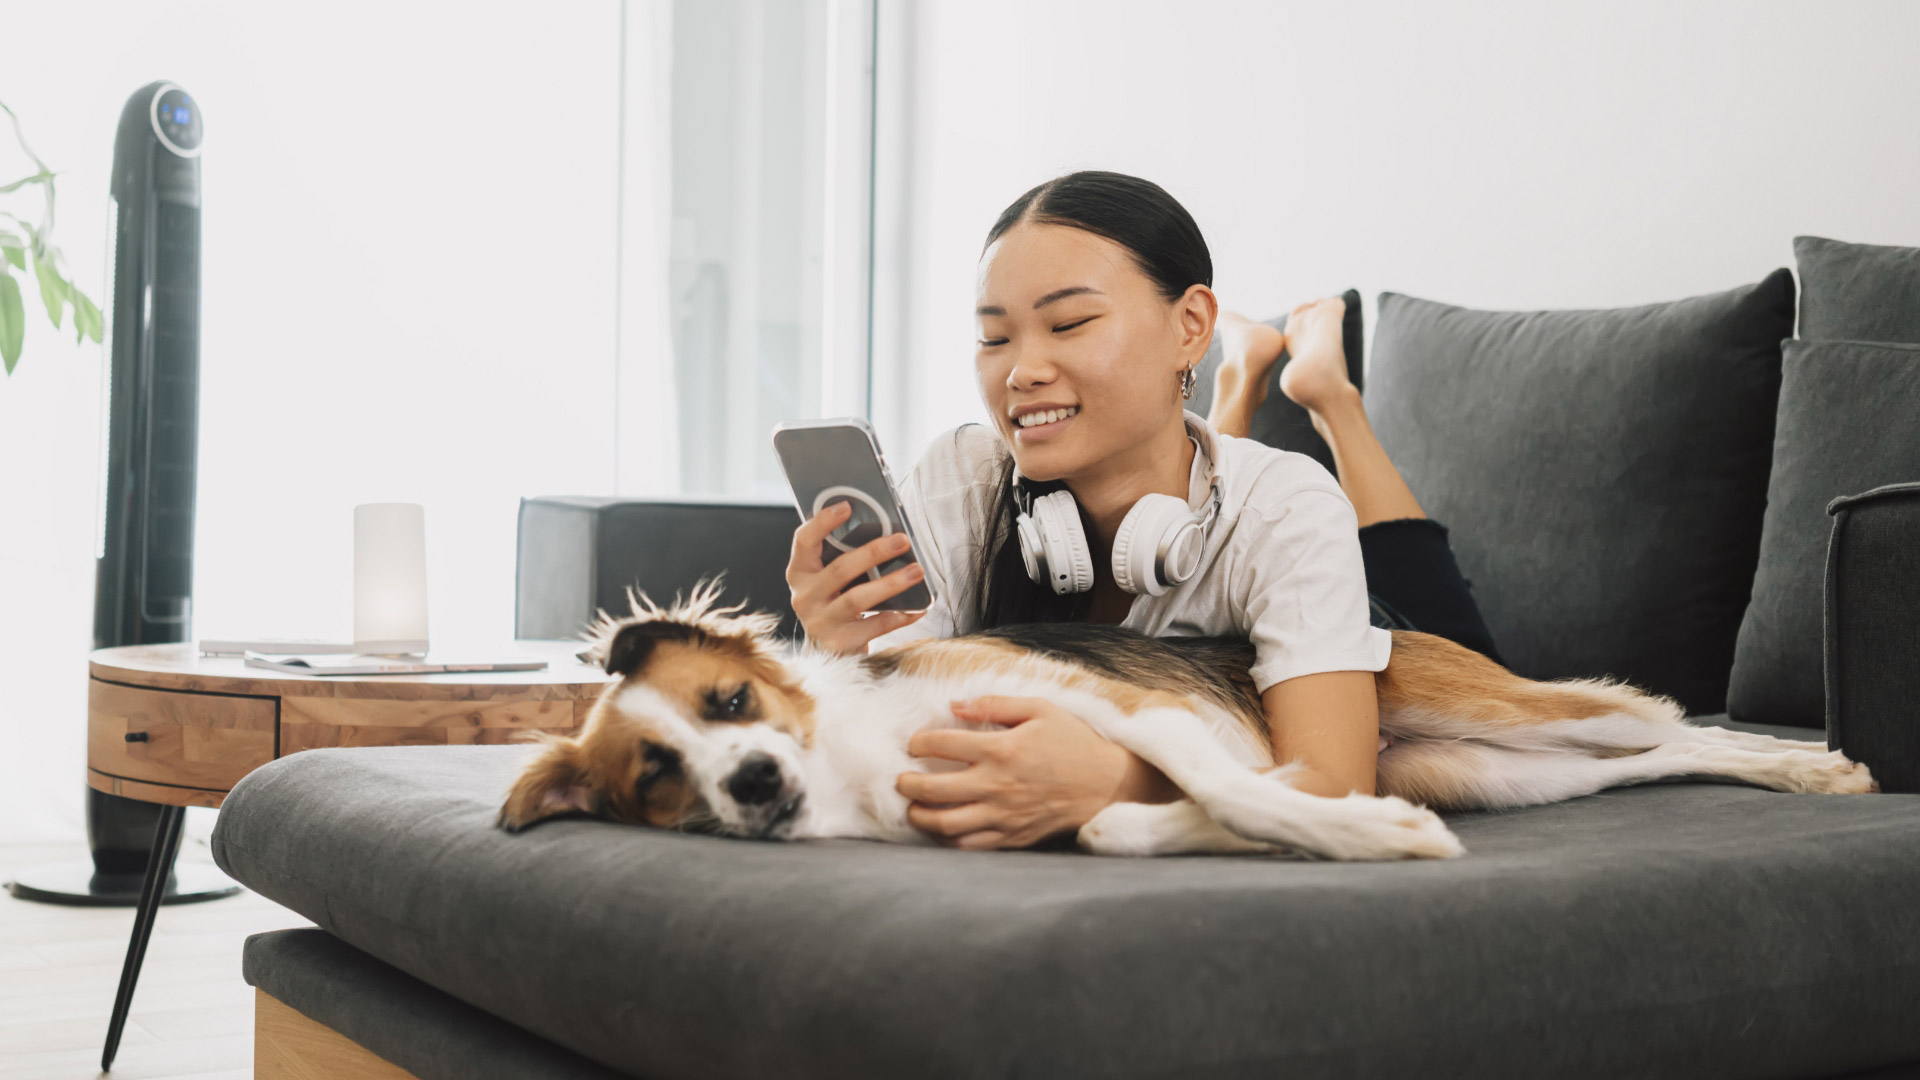 A woman on her phone lounges on a couch with her dog